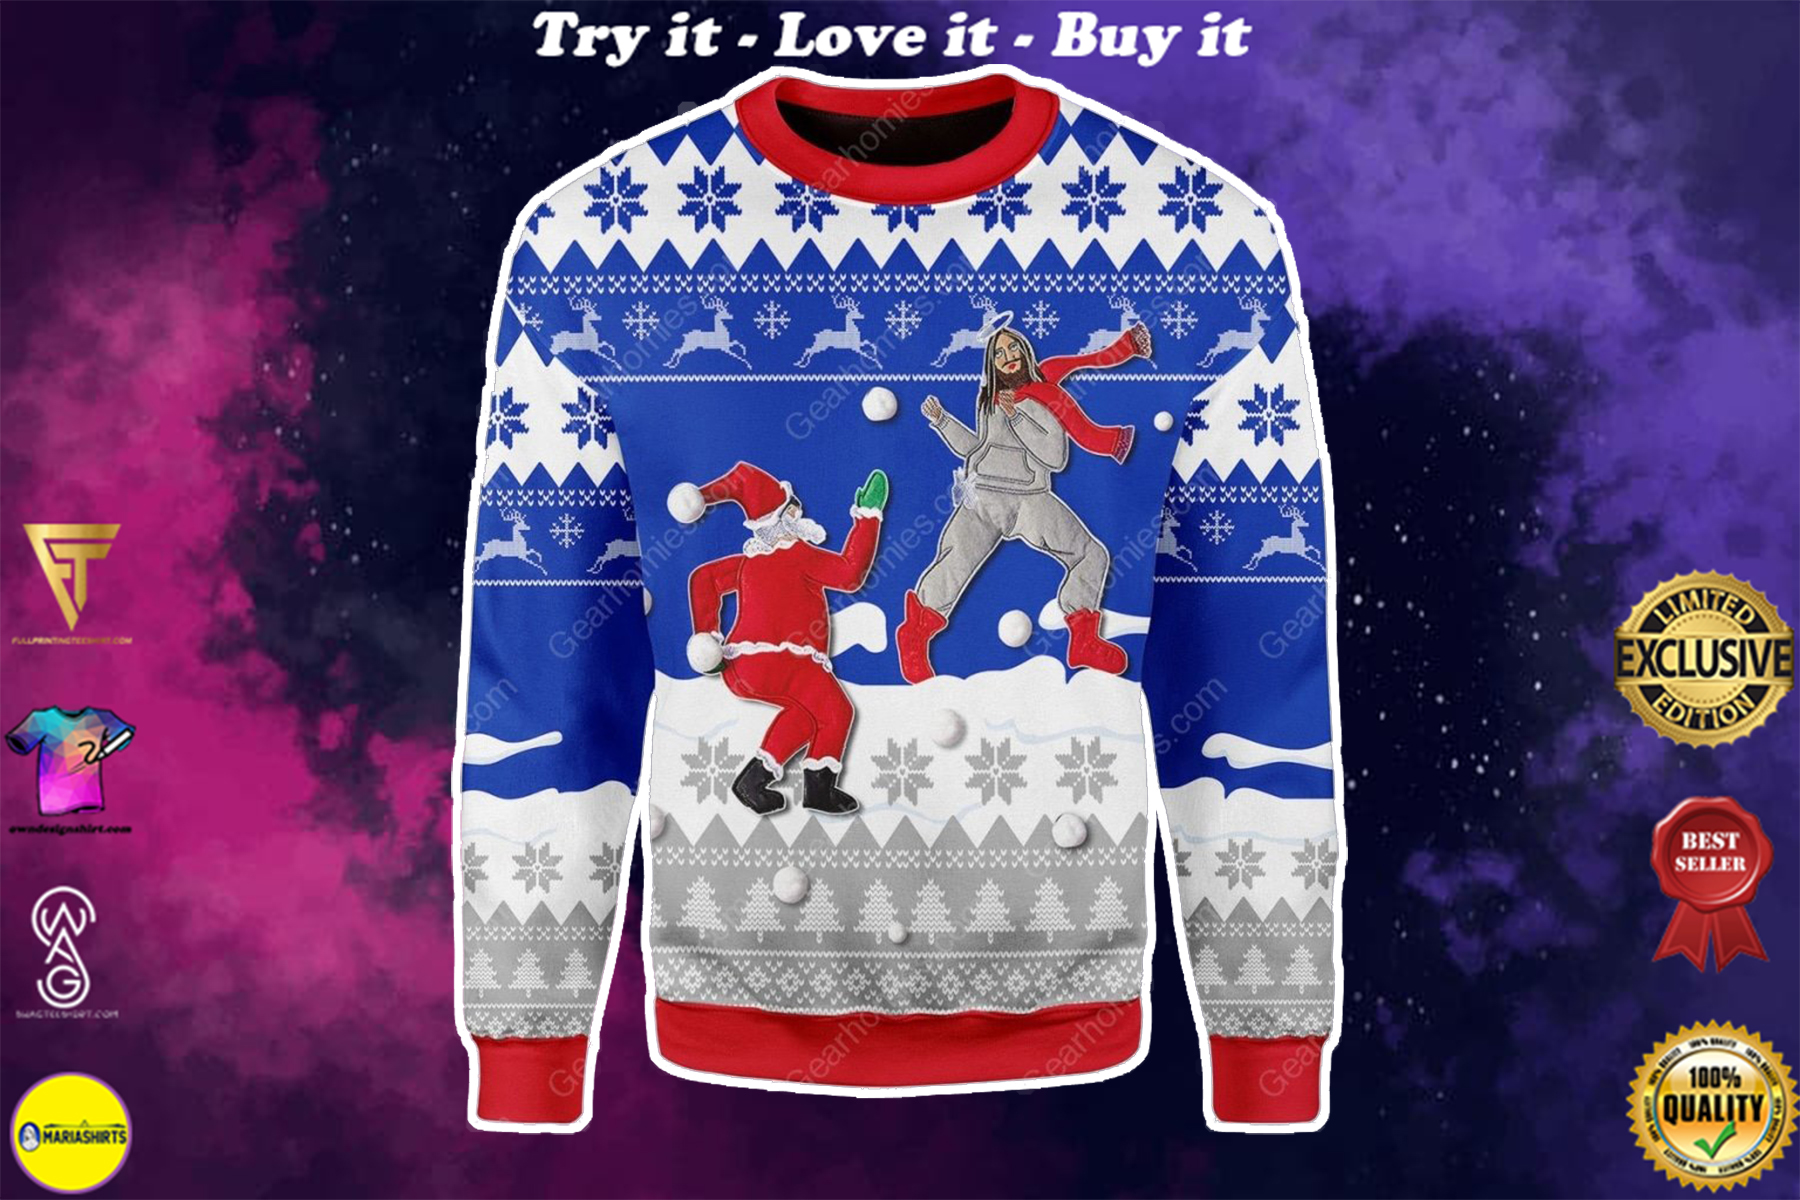 santa and Jesus play snowball all over printed ugly christmas sweater